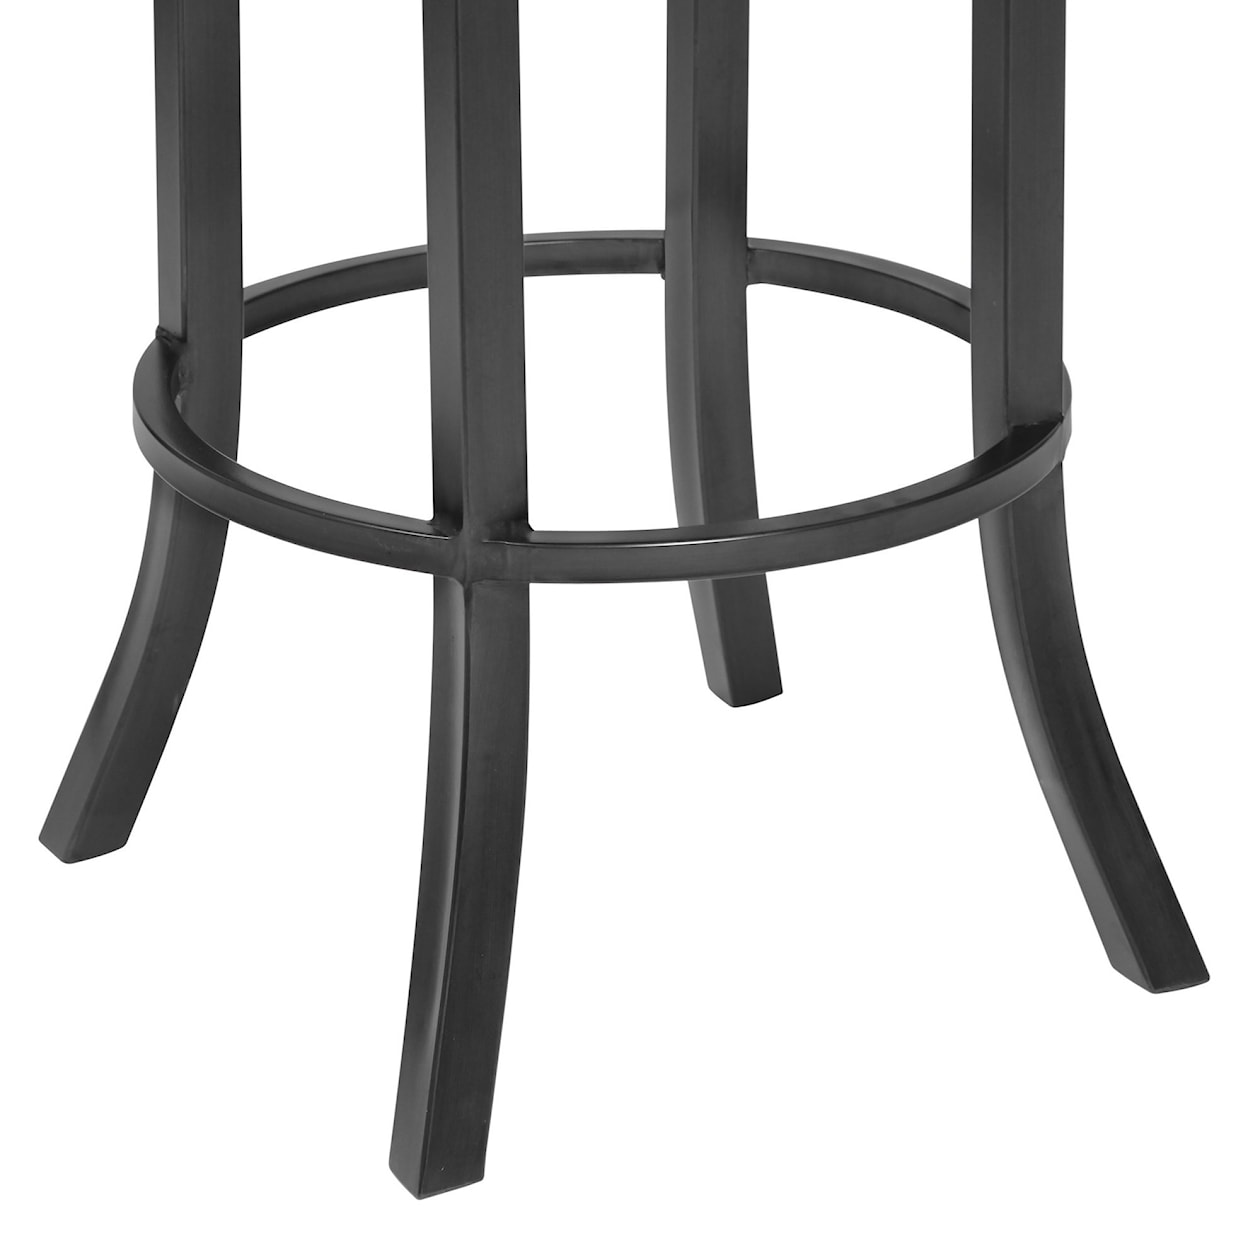 Armen Living Bree 26" Counter Height Barstool in Mineral